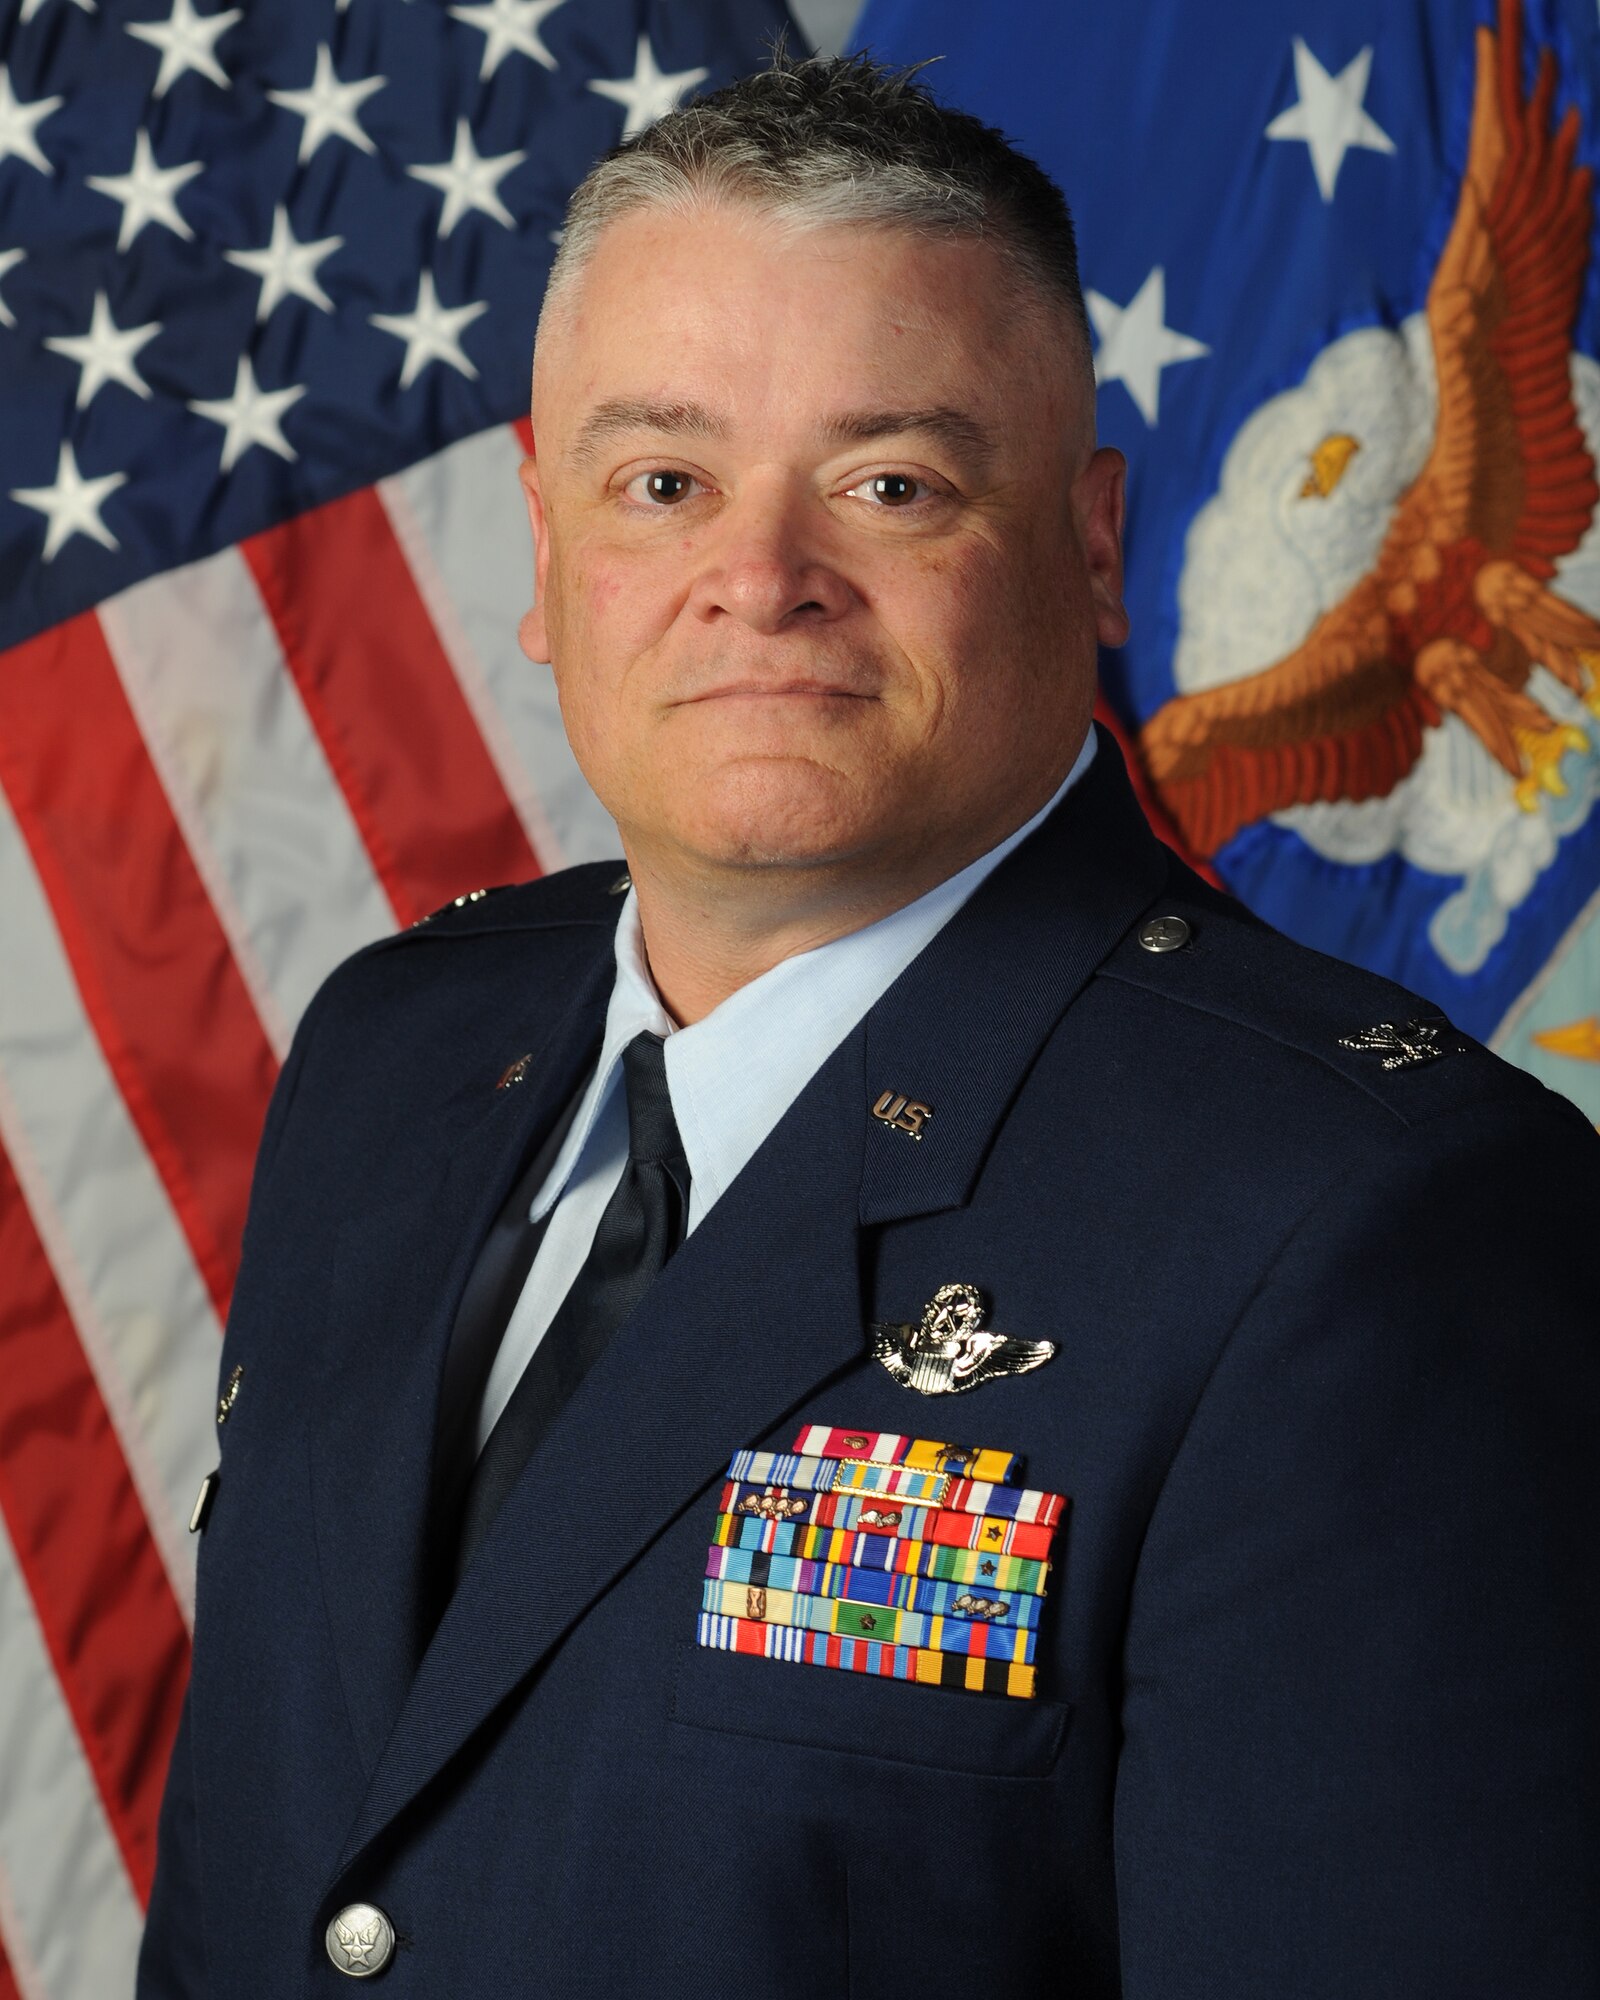 Colonel Ken “Willie B” Eaves has been named commander of the Missouri National Guard’s 131st Bomb Wing at Whiteman Air Force Base, April 22, 2016. (Courtesy photo)